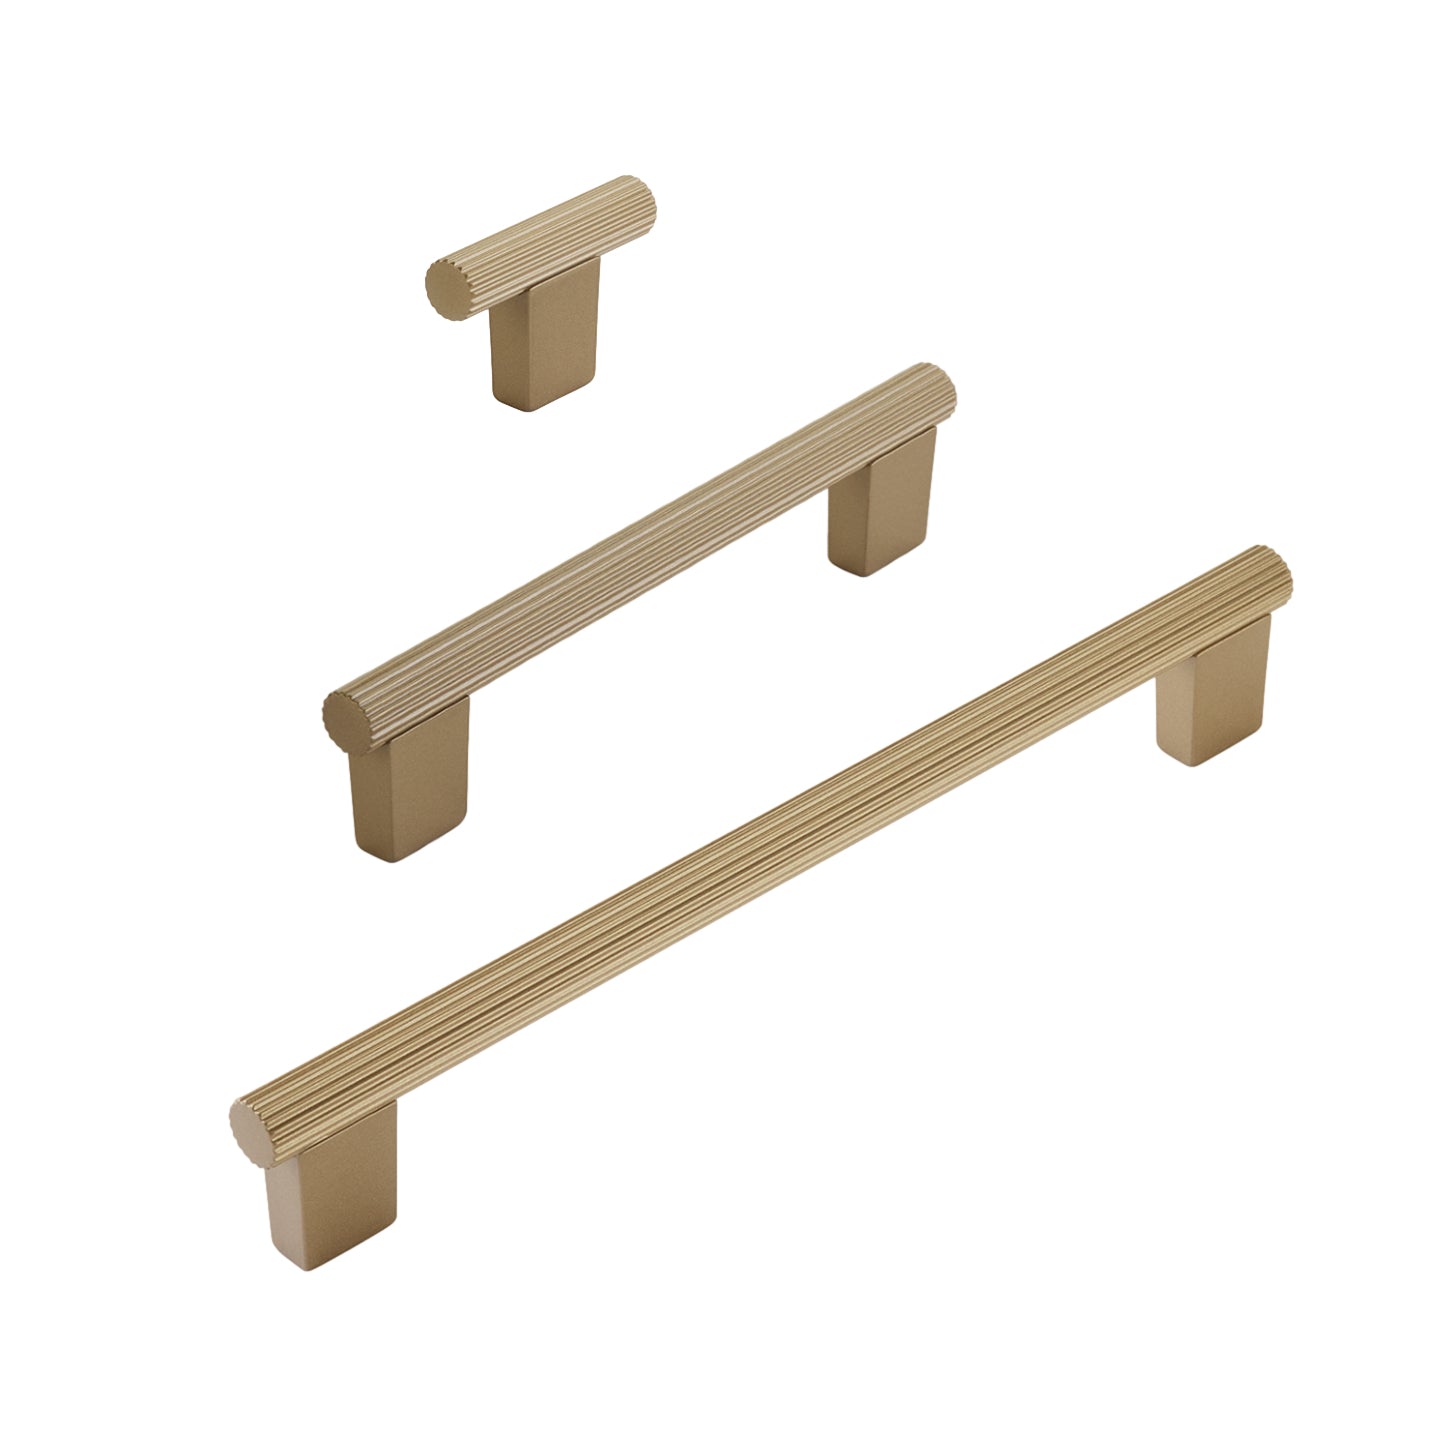 Warm Gold "Knox" Cabinet Knobs and Drawer Pulls - Industry Hardware